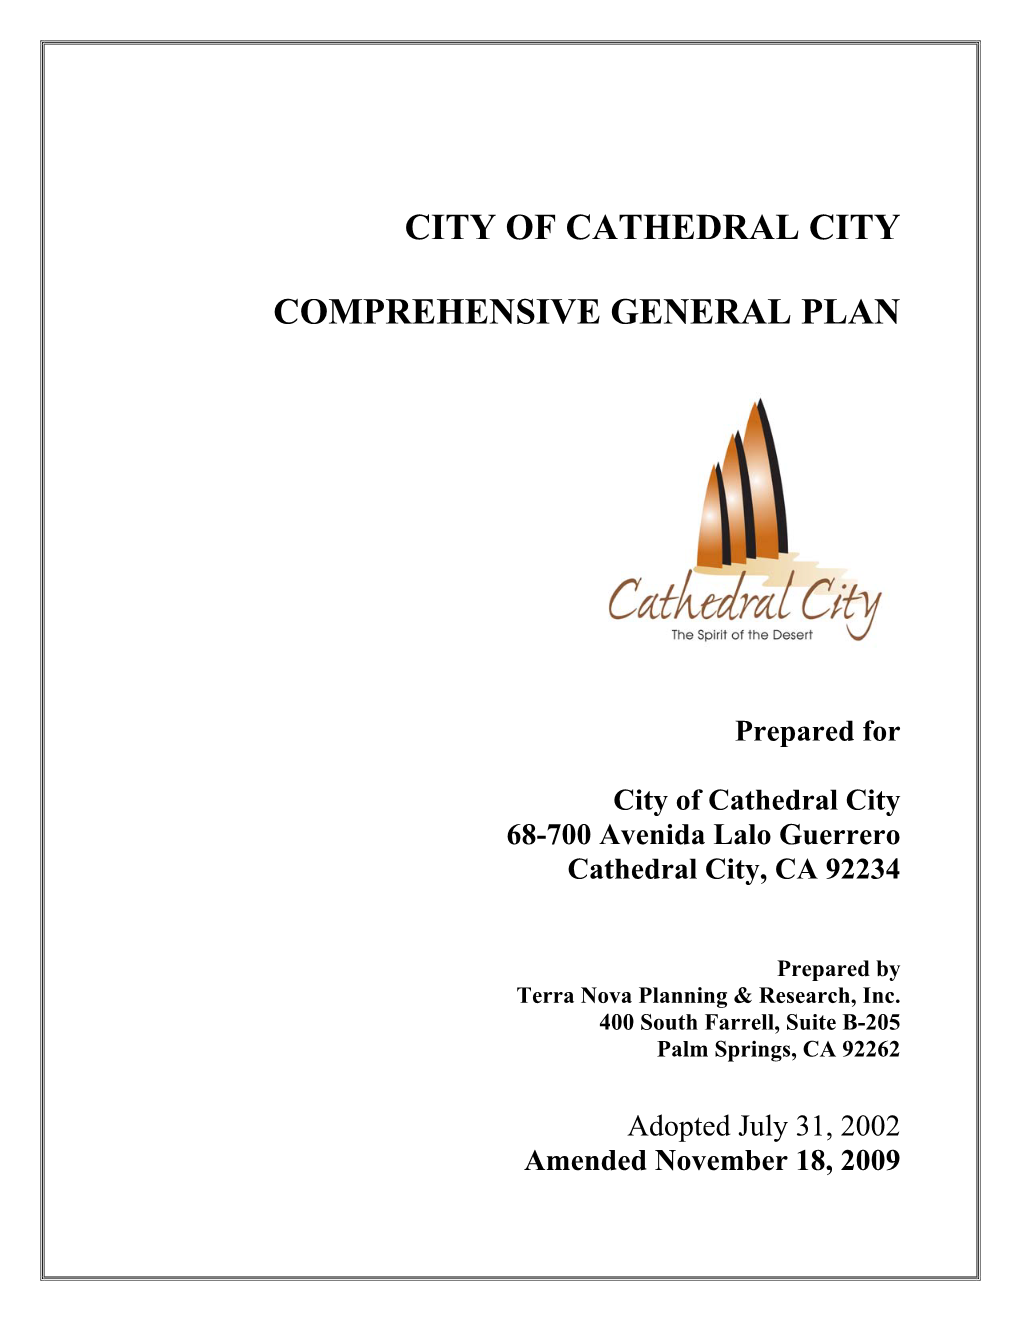 City of Cathedral City Comprehensive General Plan